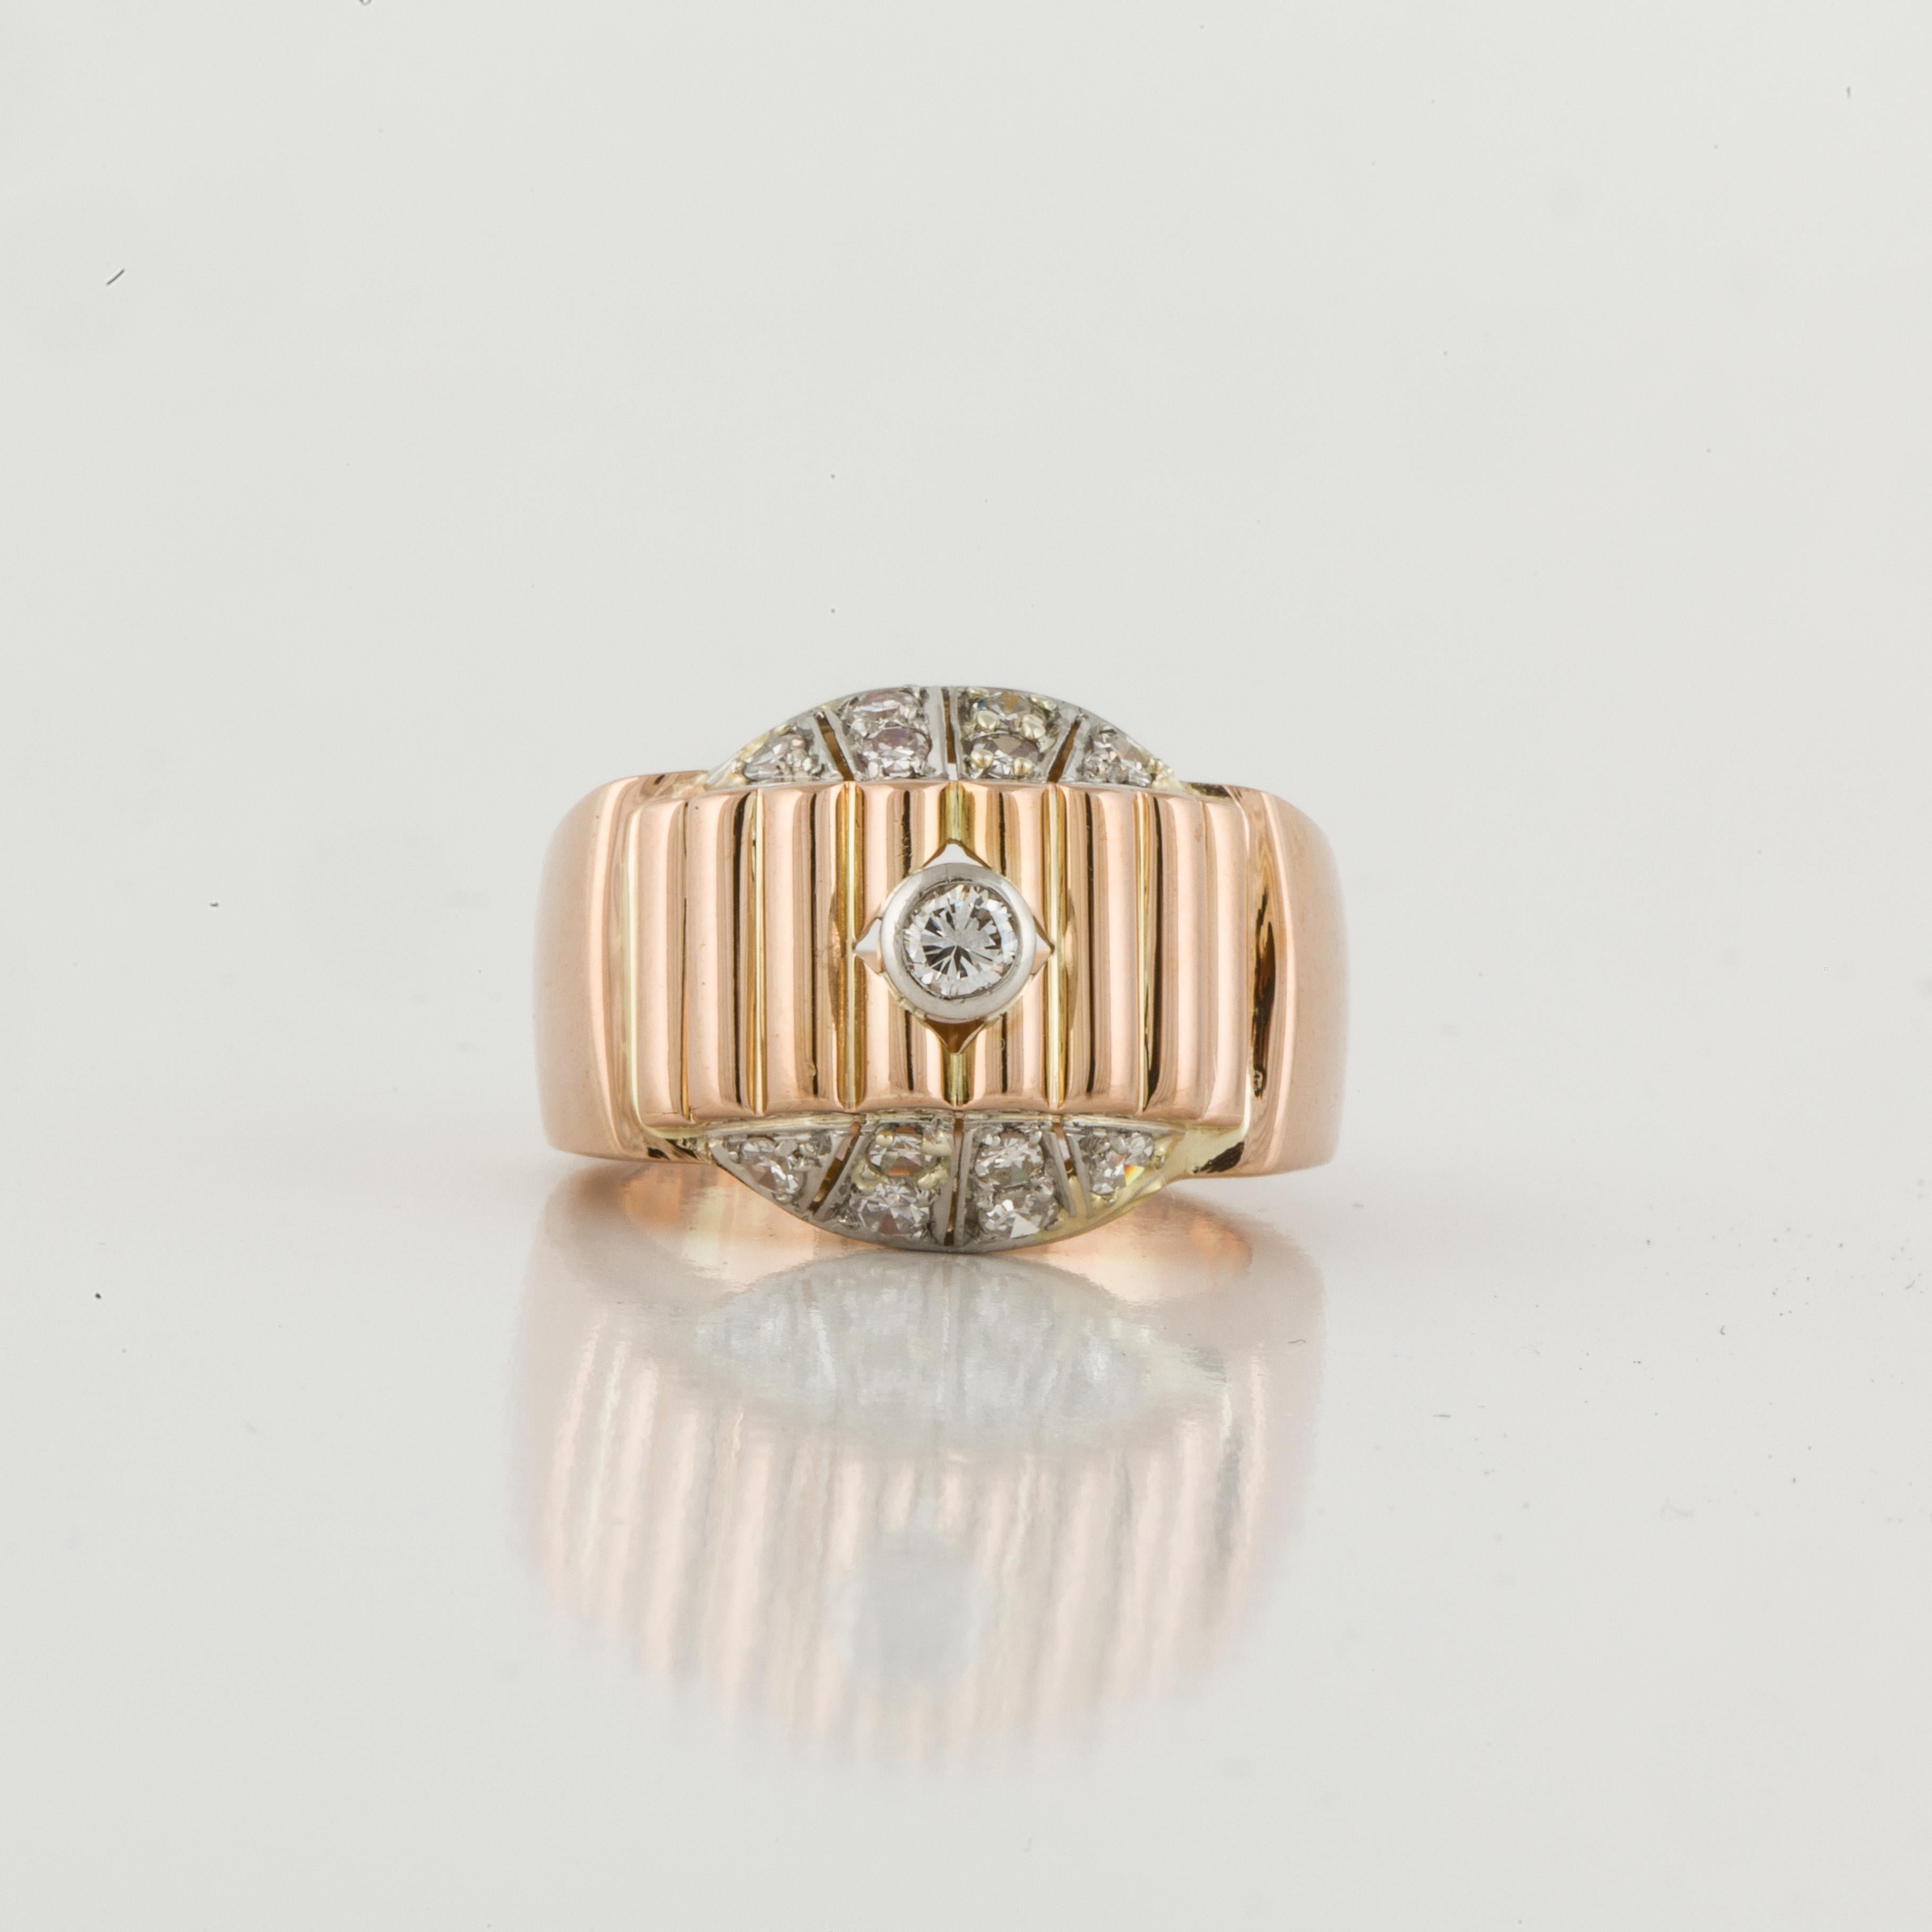 14K rose gold ring with 13 round diamonds in a stair step design.  The diamonds total 0.45 carats; H-I color and VS2-SI1 clarity.  Measures 3/4 inches long, 5/8 inches wide and stands 1/2 inch off the finger.